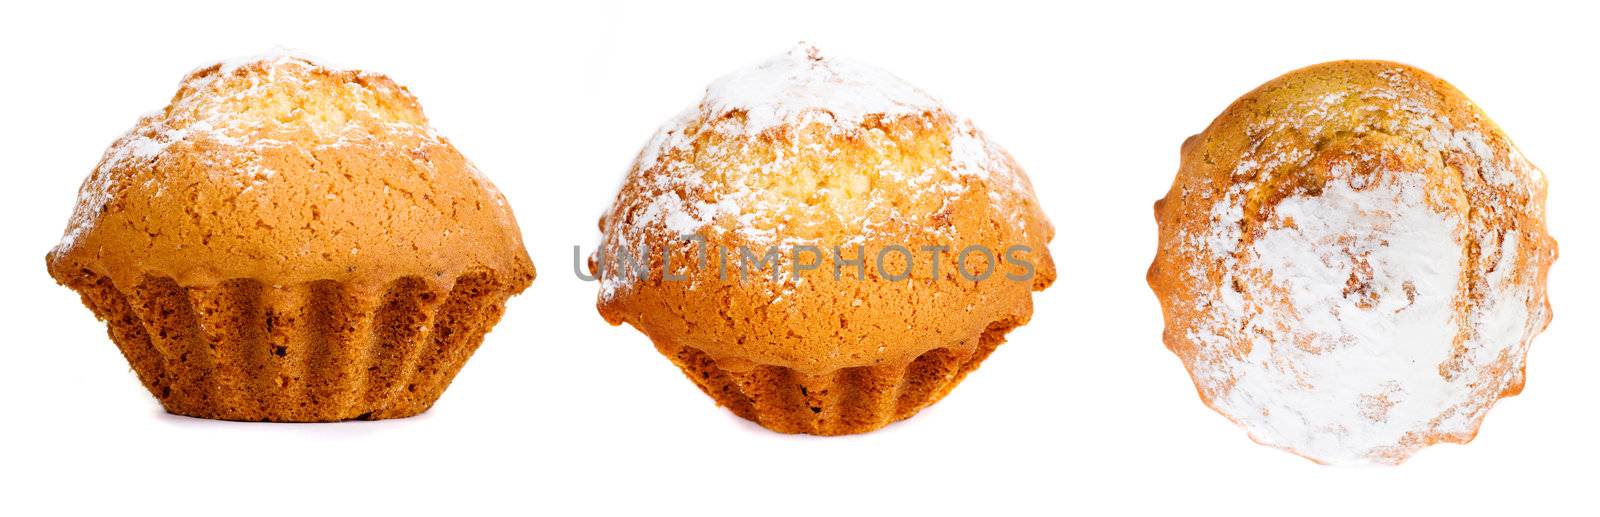 Tasty muffin with sugar powder isolated on white background